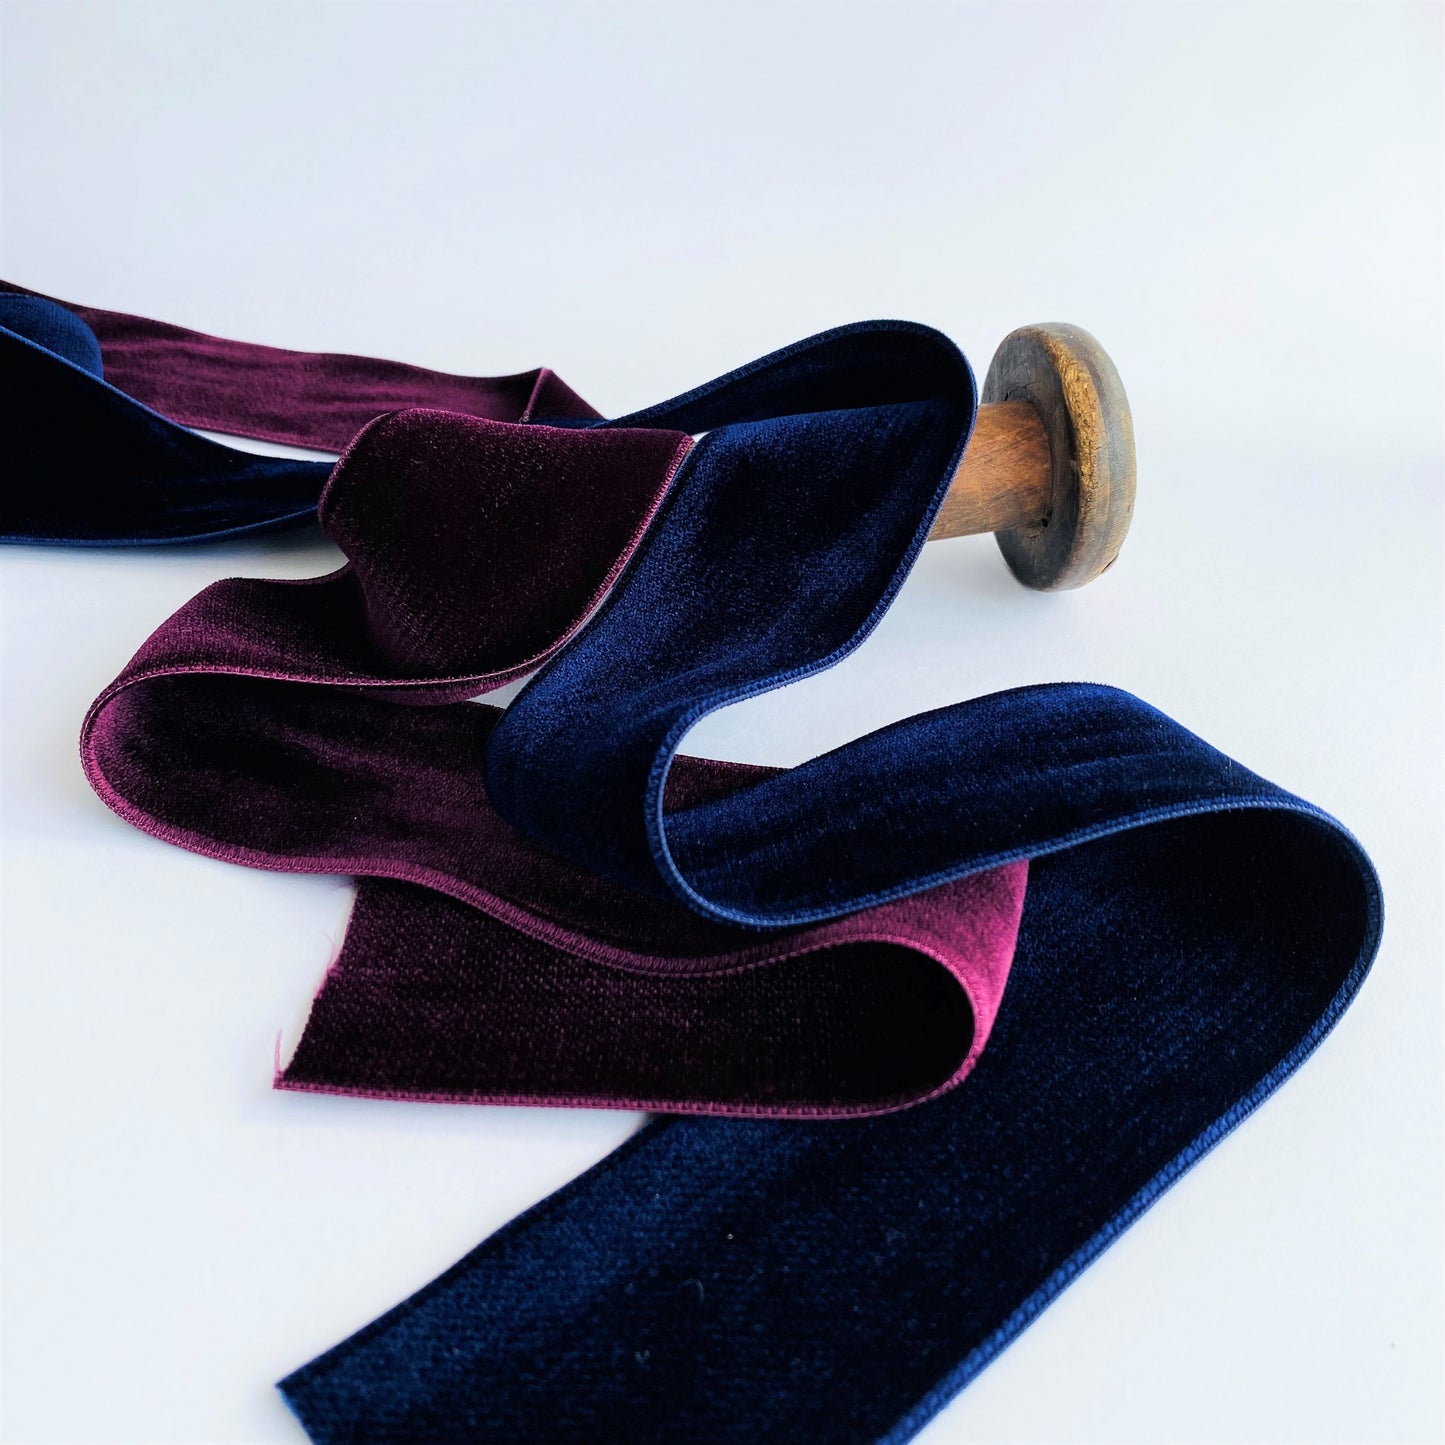 48mm Double Sided luxury Velveteen Ribbon by MOKUBA A beautifully soft and luxurious double sided velvet ribbon by Mokuba 